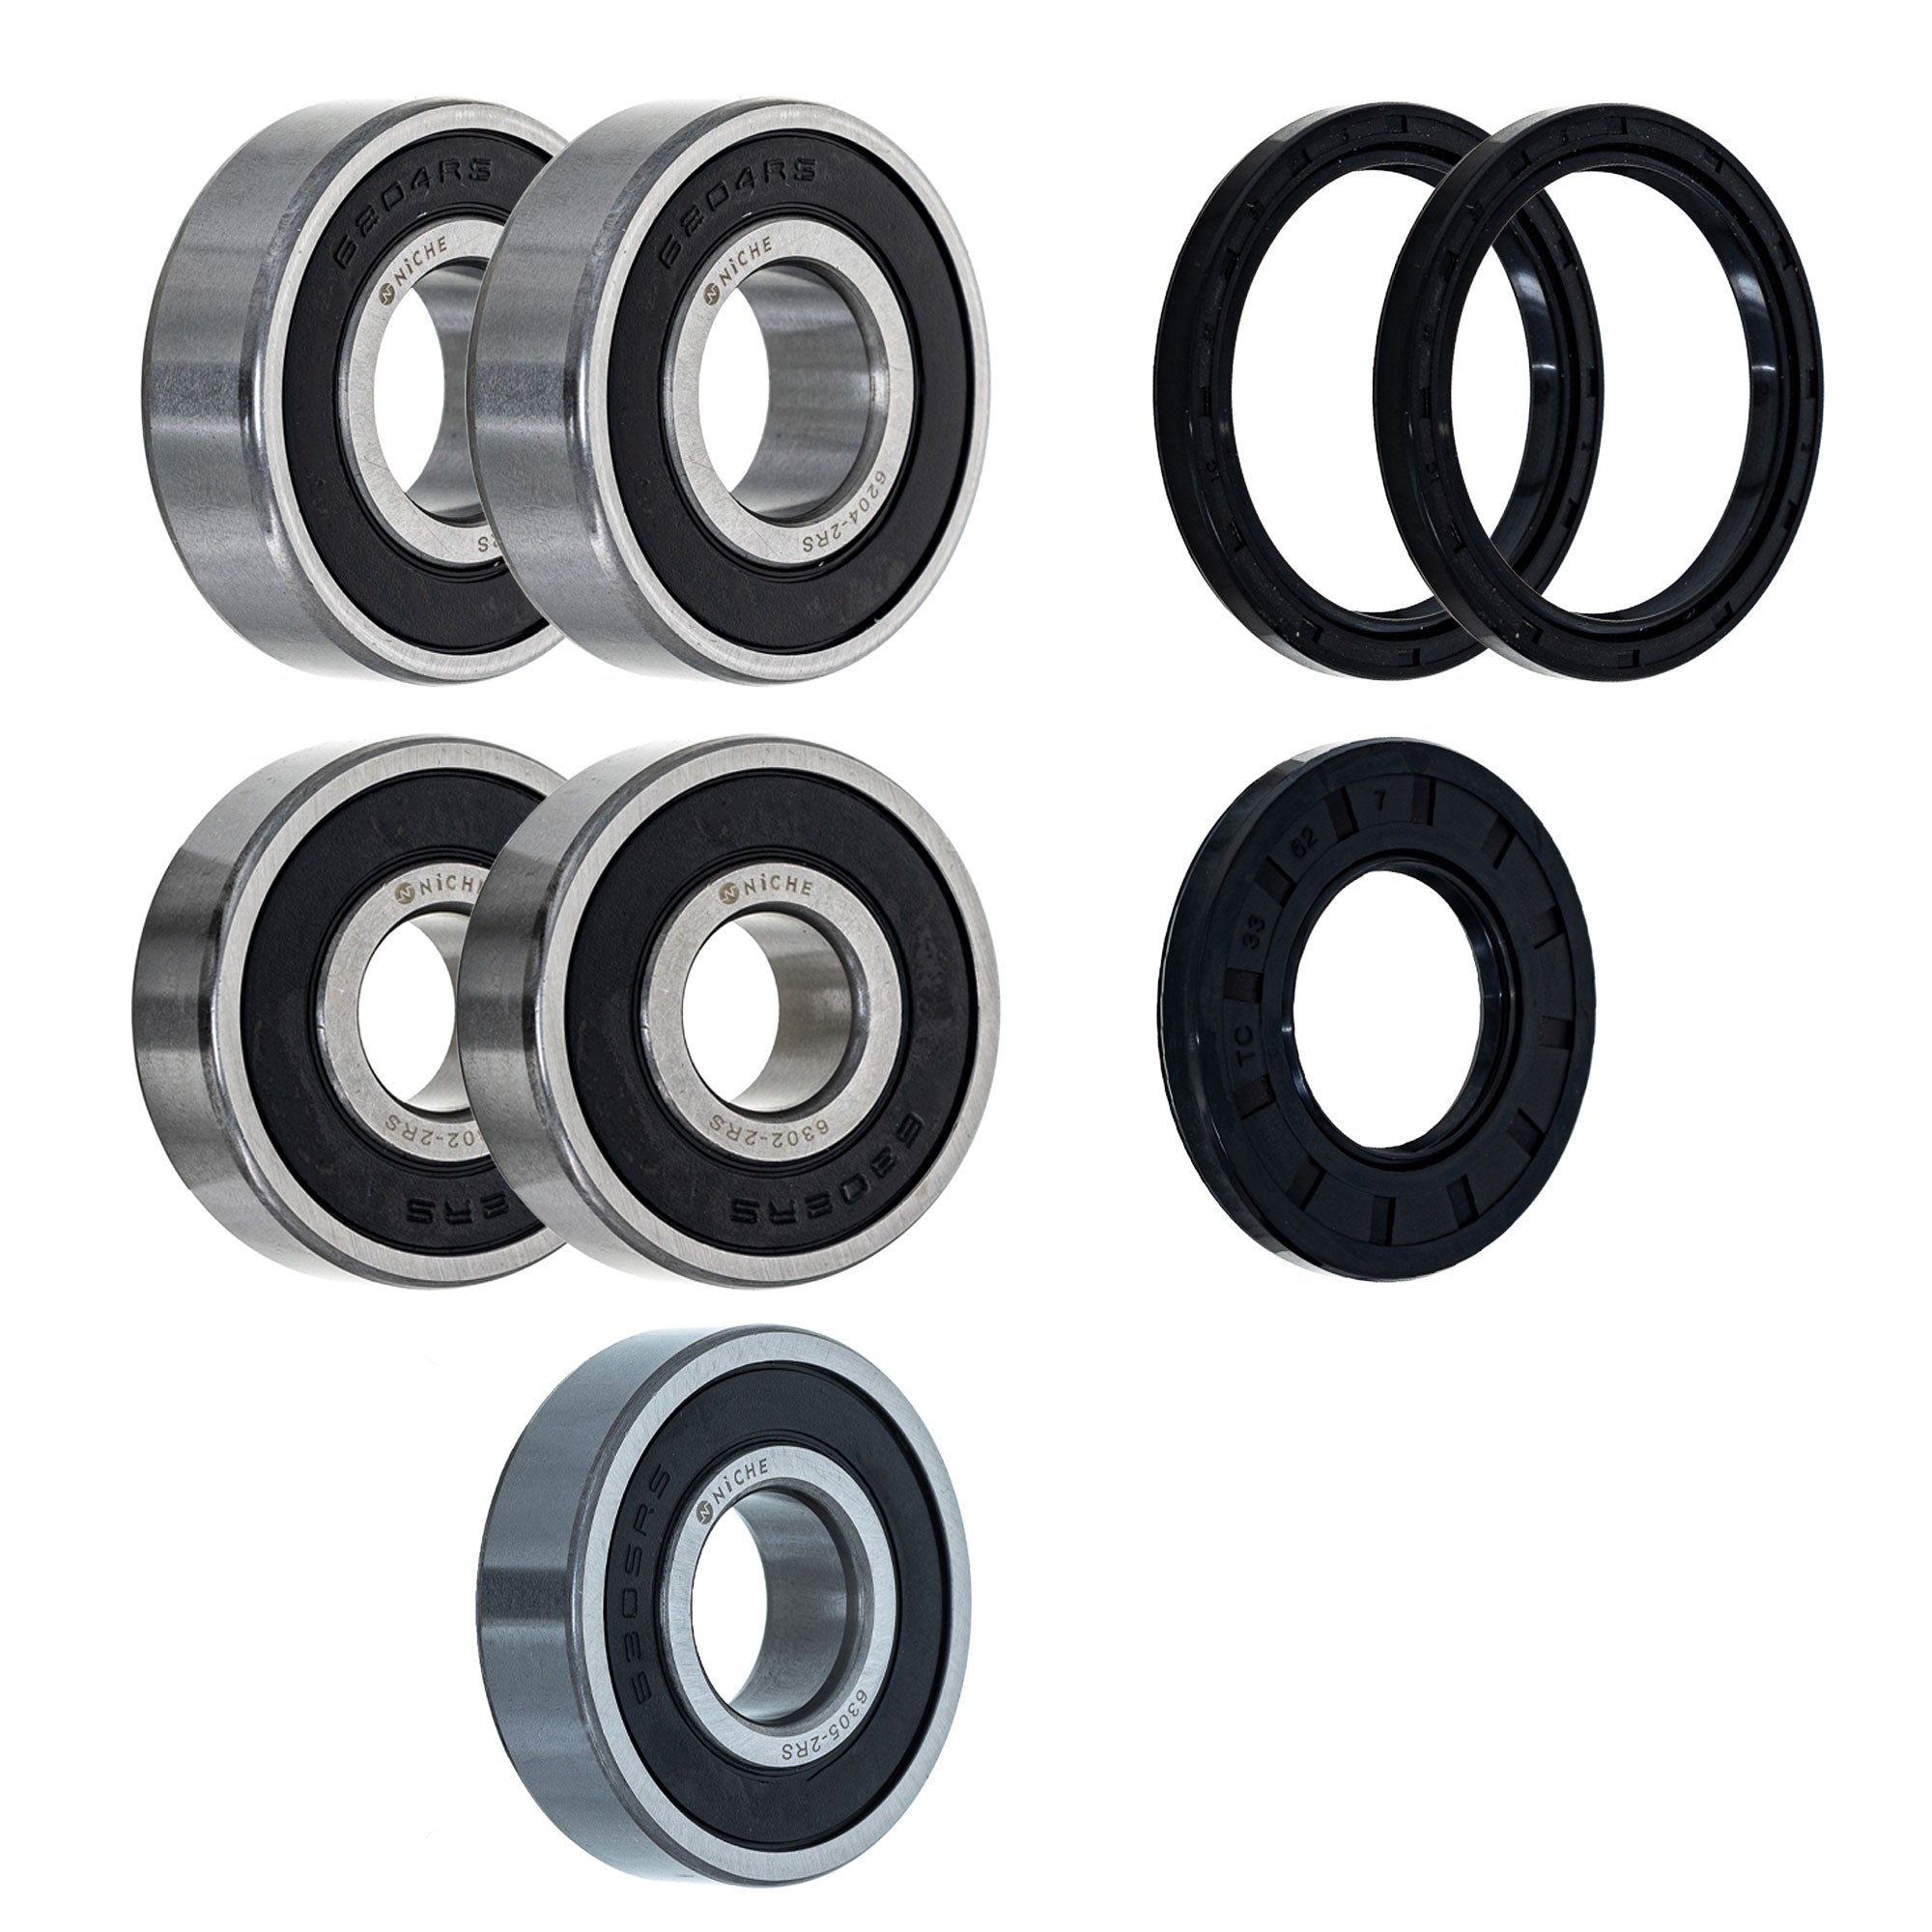 Wheel Bearing Seal Kit for zOTHER Ref No GS750T GS750S GS750 GS1150 NICHE MK1008601